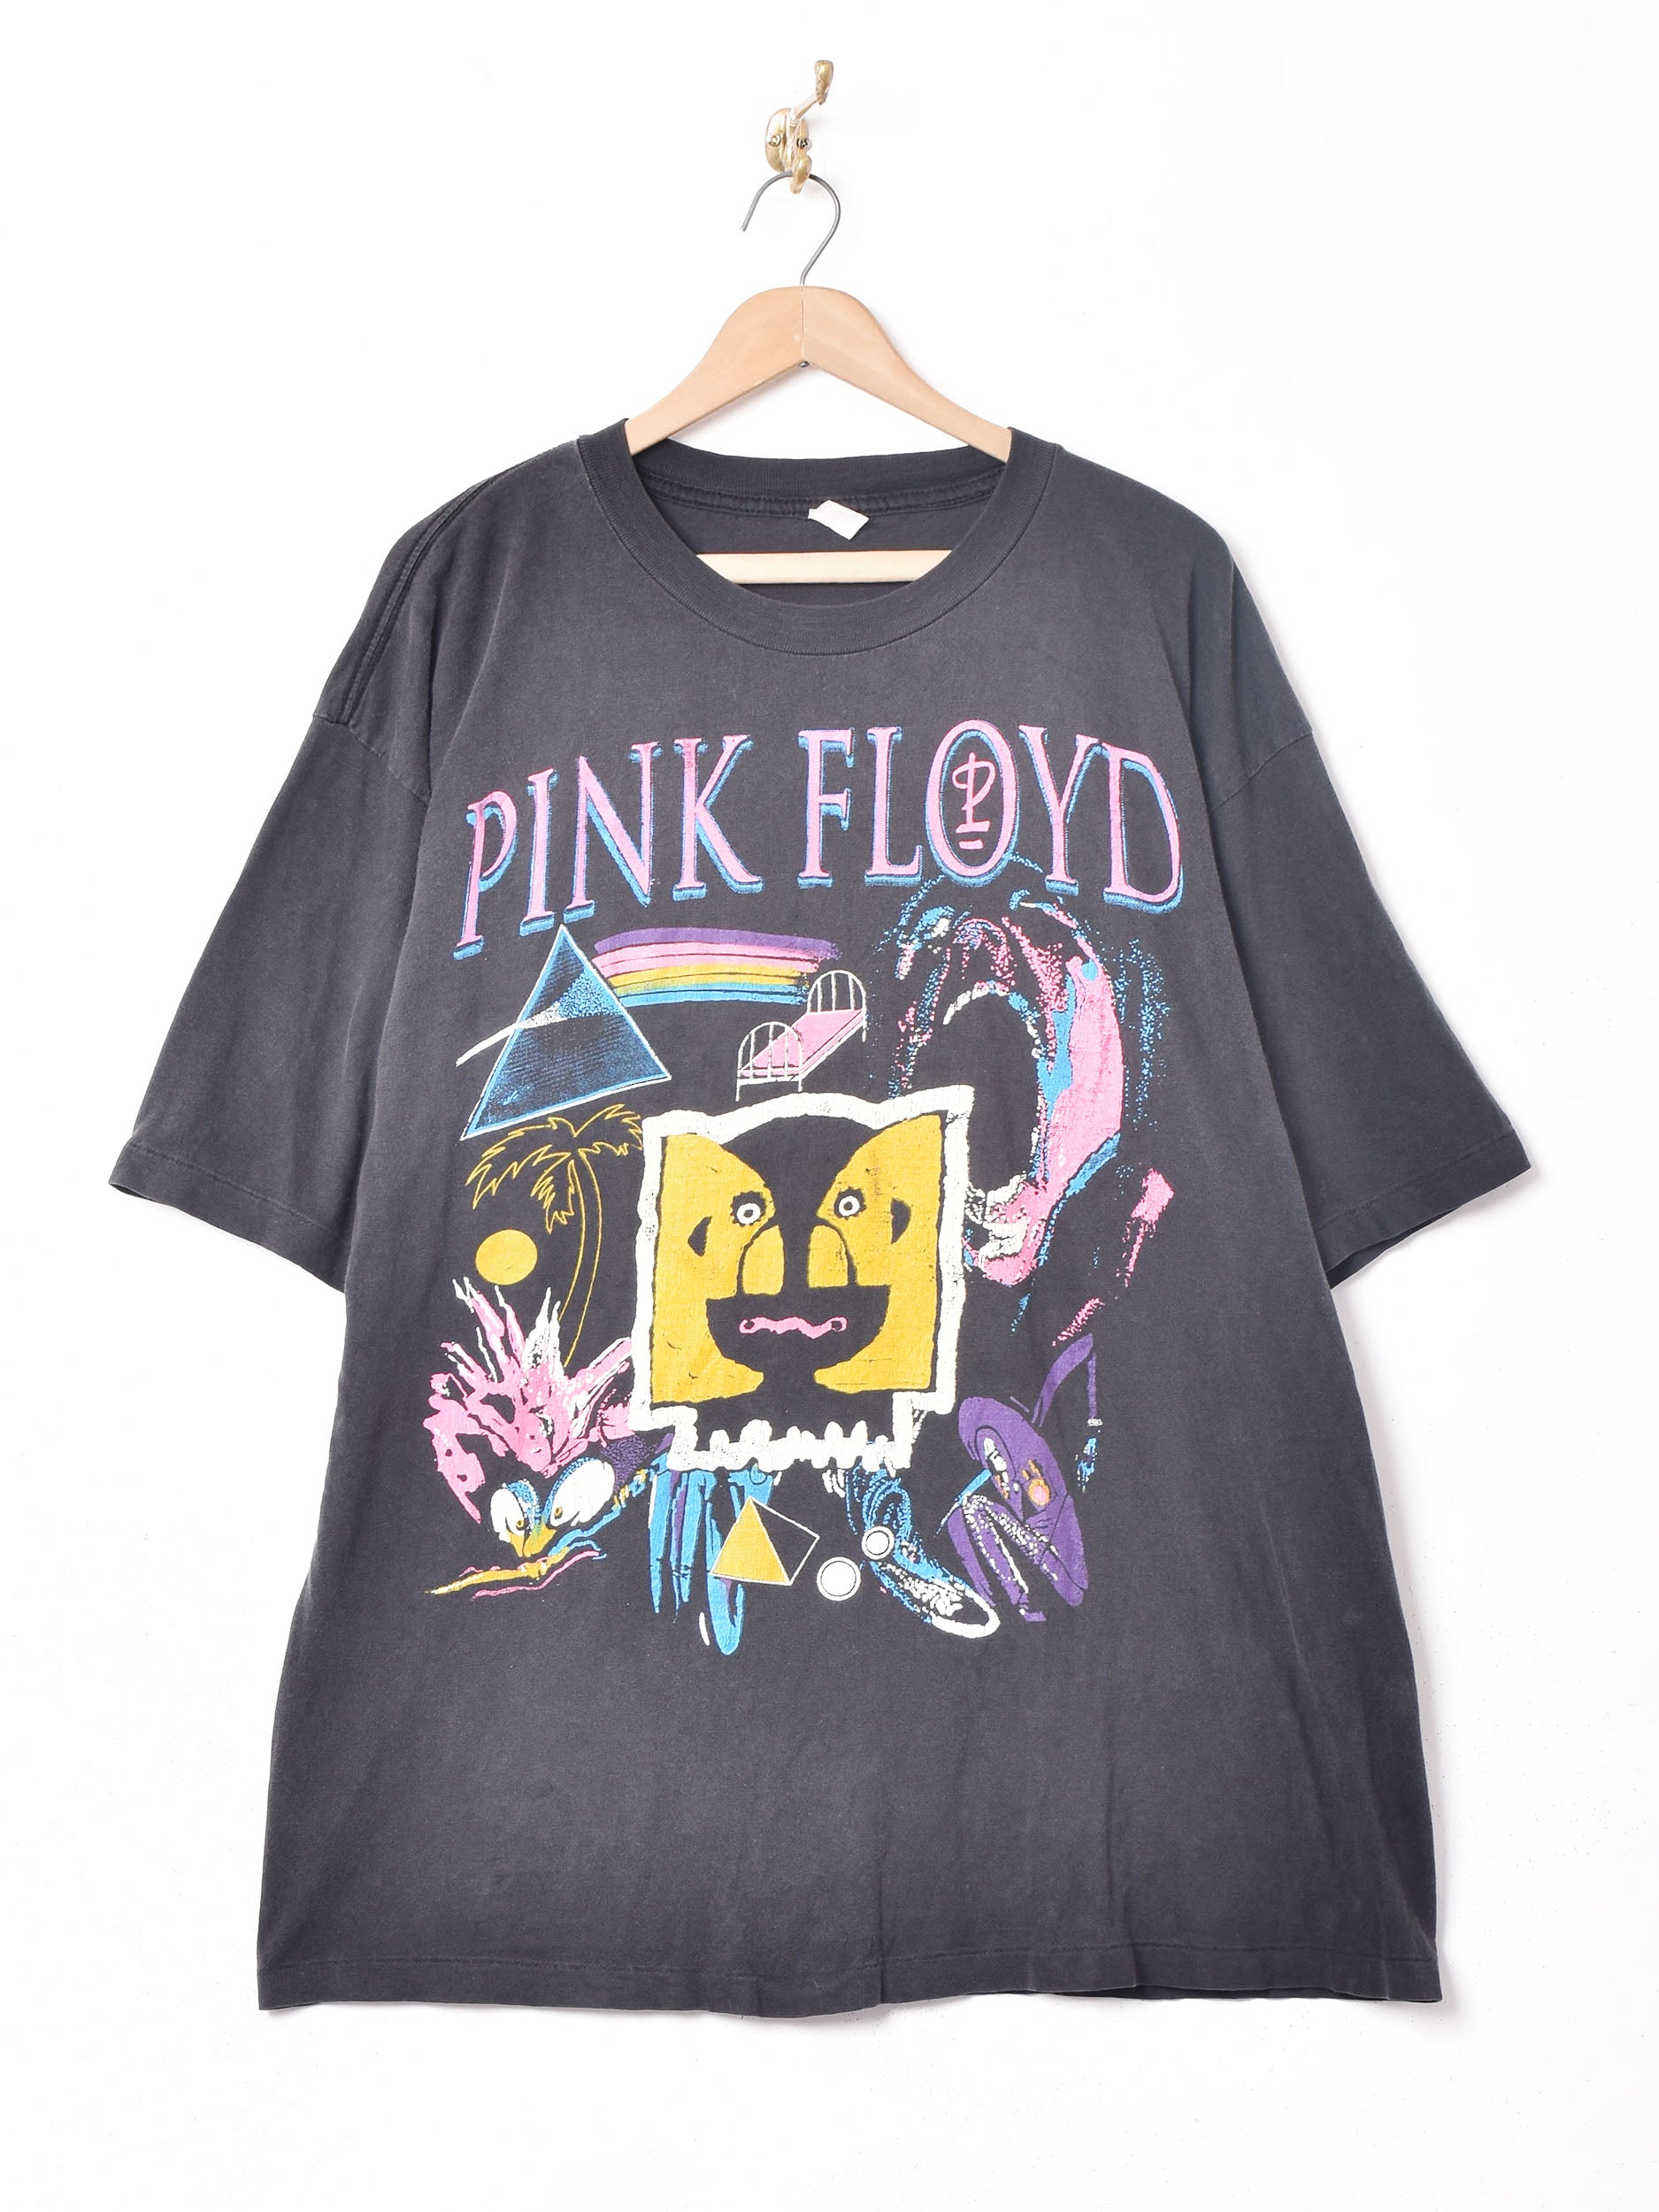 PINK FLOYD ツアーTシャツ – 古着屋Top of the Hillのネット通販